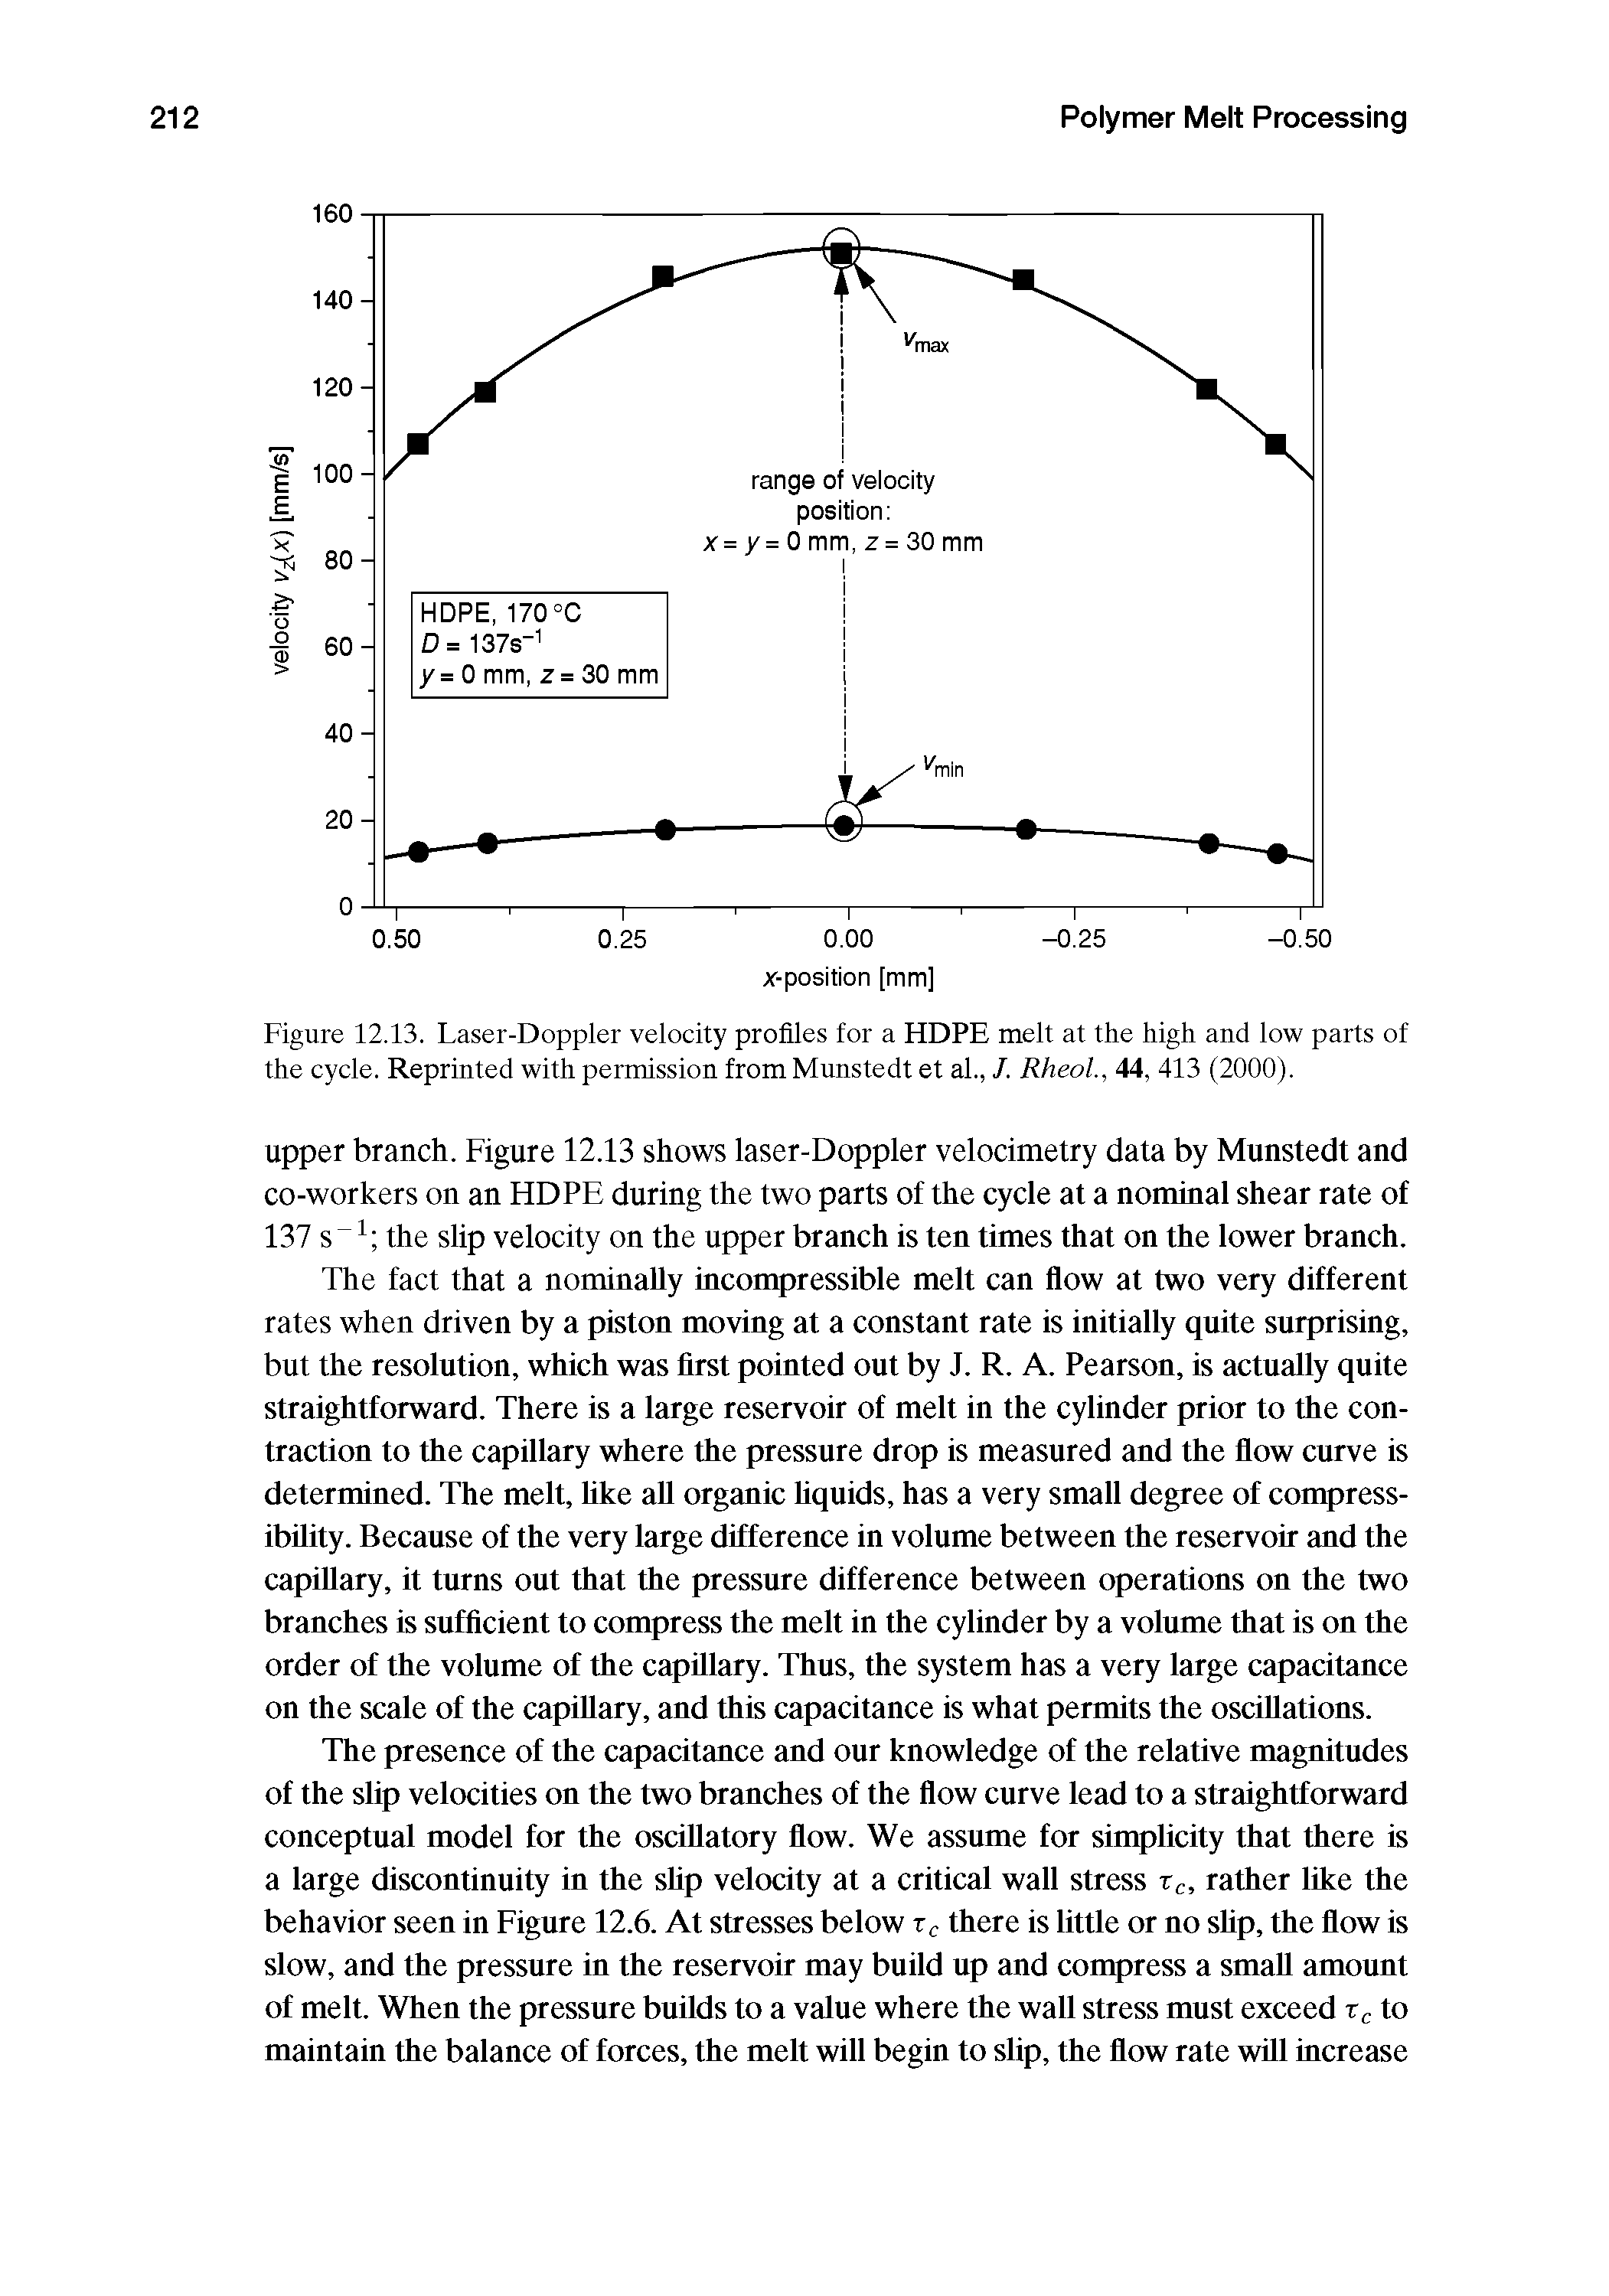 Figure 12.13. Laser-Doppler velocity profiles for a HDPE melt at the high and low parts of the cycle. Reprinted with permission from Munstedt et al., /. RheoL, 44, 413 (2000).